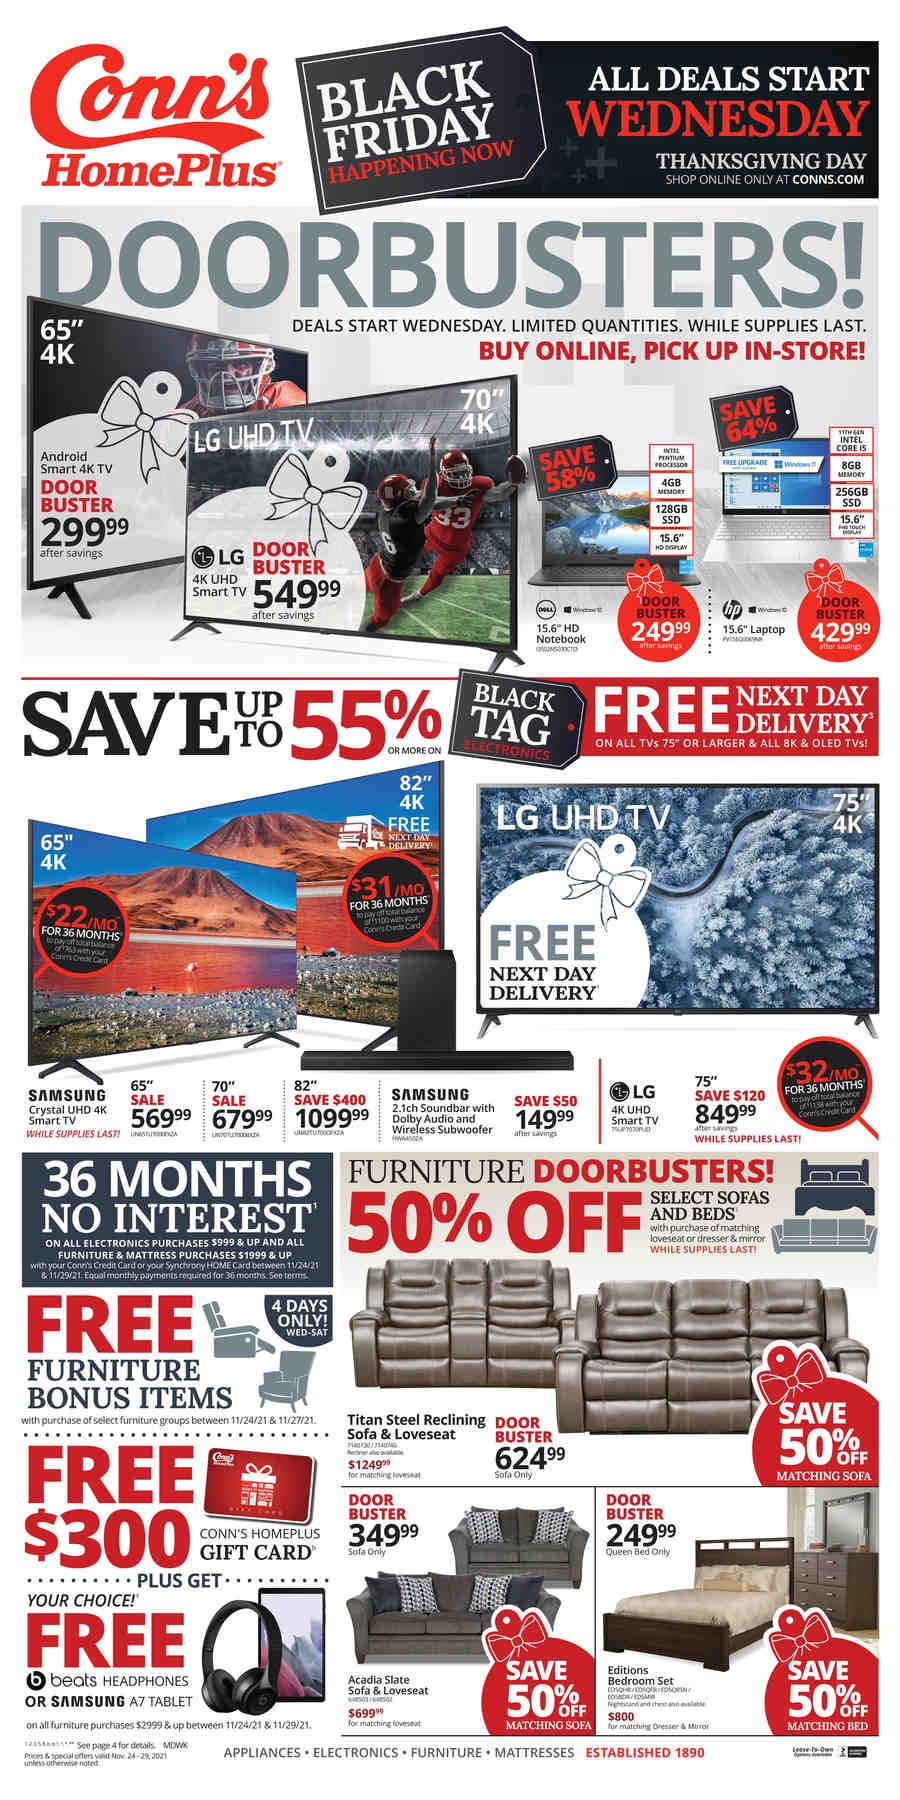 Conn's HomePlus 2021 Black Friday Ad Page 1